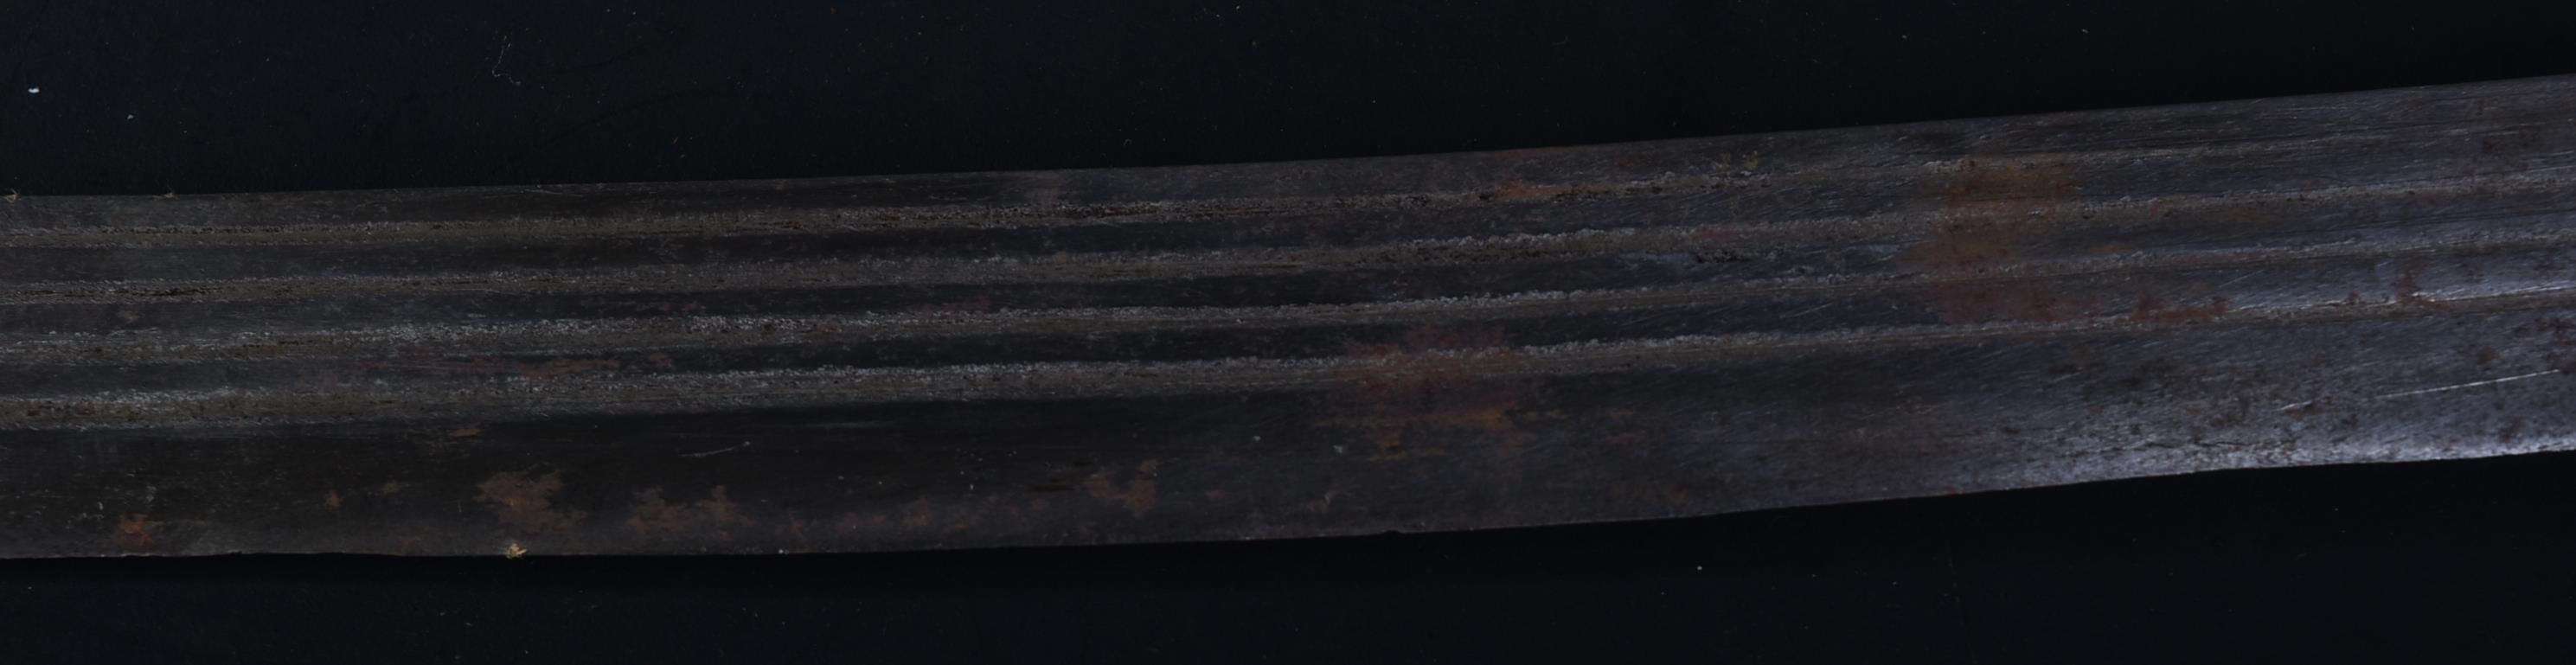 EARLY 19TH CENTURY NORTH INDIAN TULWAR SWORD - Image 4 of 8